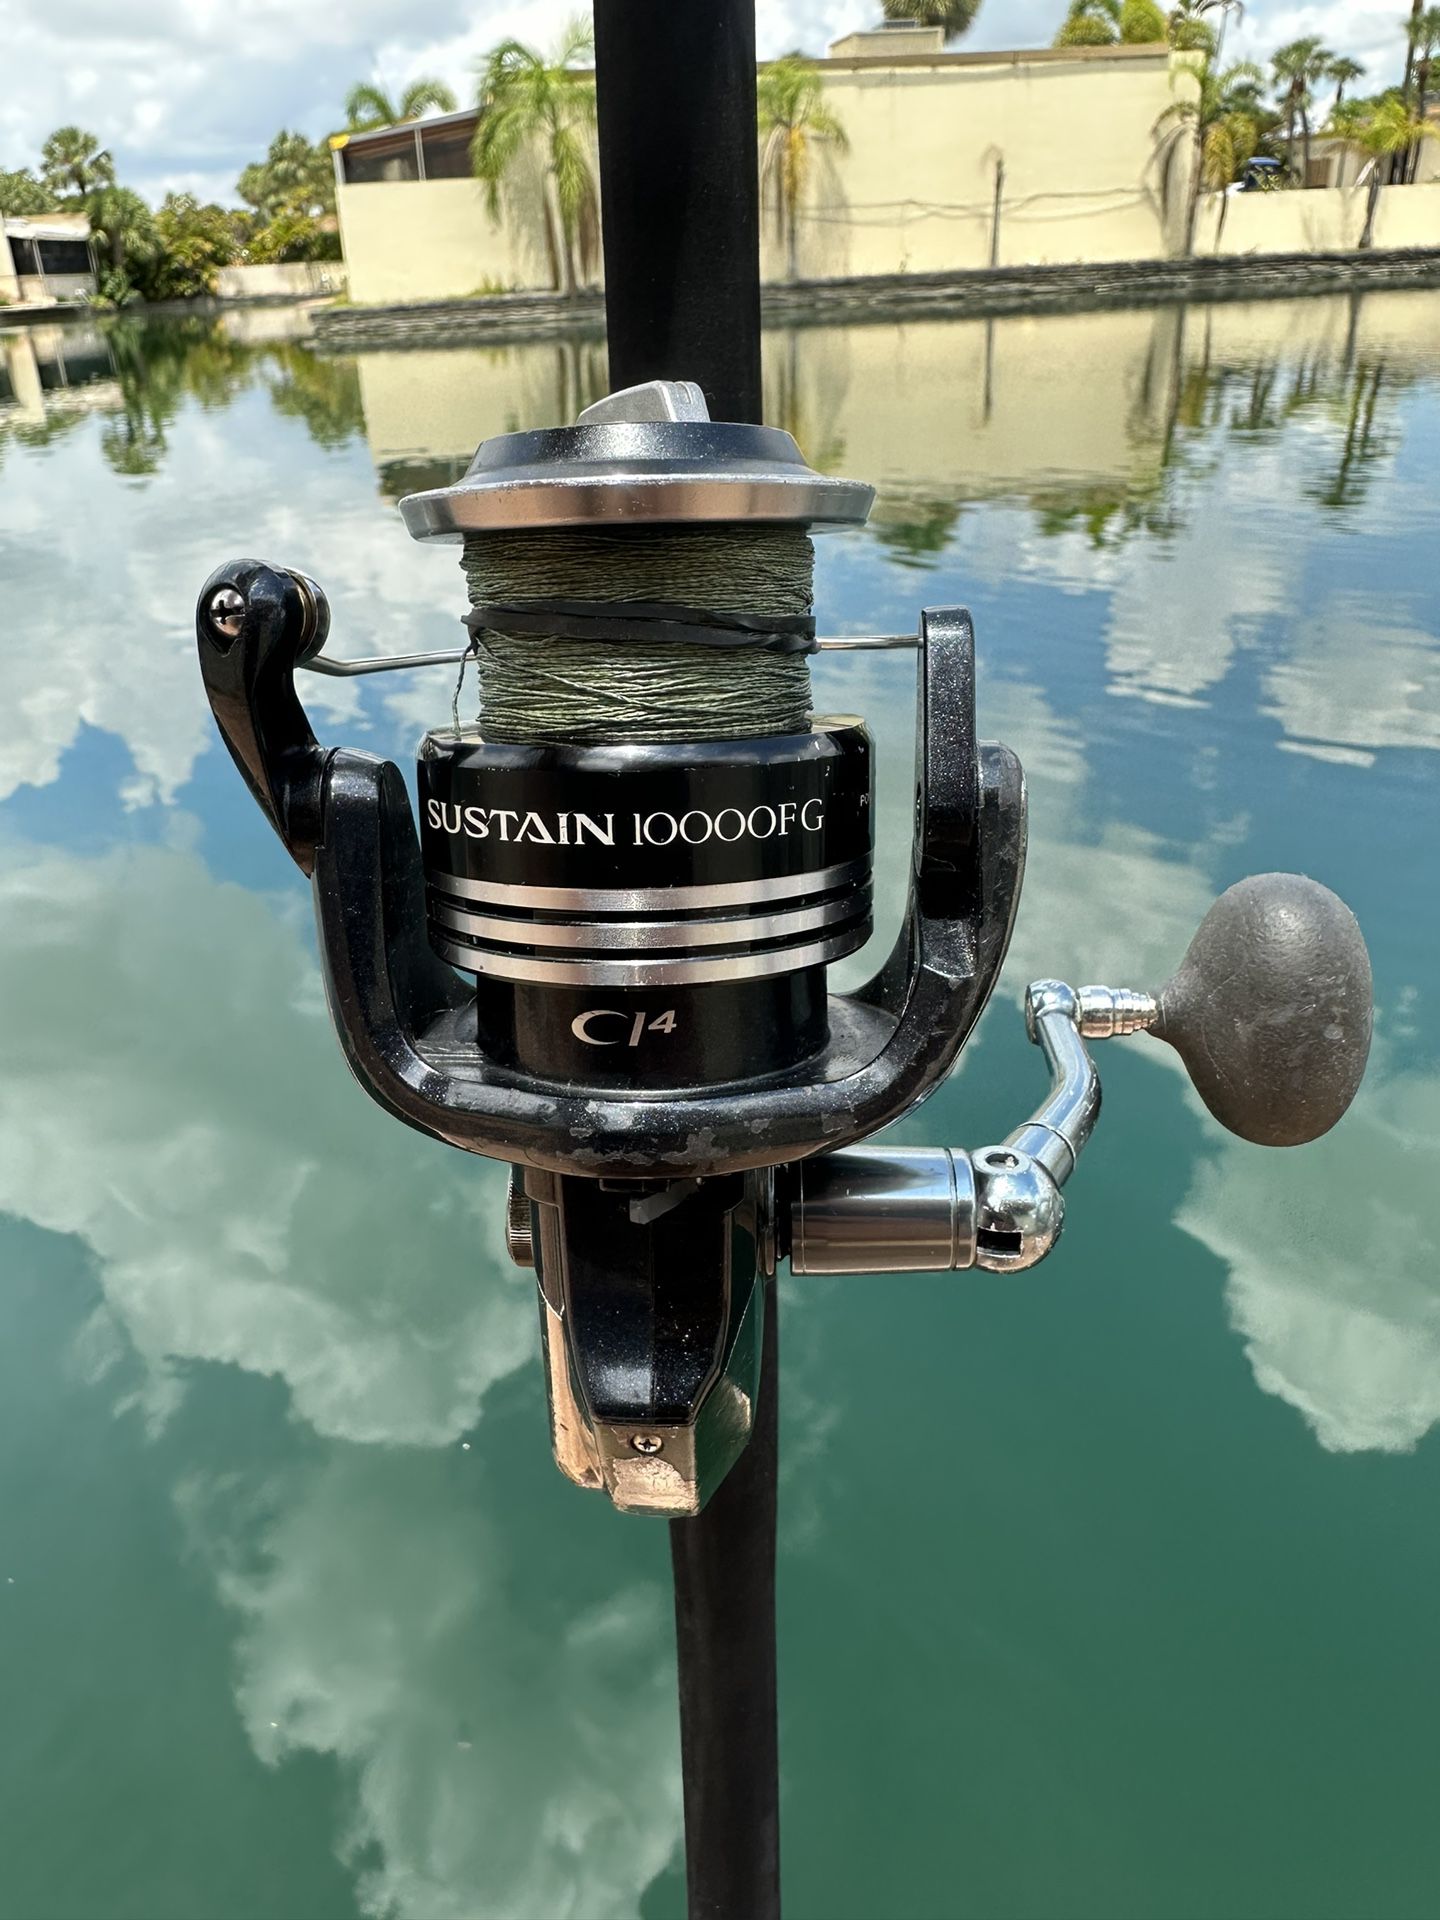 Preowned Shimano Sustain 10000 FG Reel, On A New Shimano Saguaro 7FT  20-40LB Rod for Sale in Hialeah, FL - OfferUp